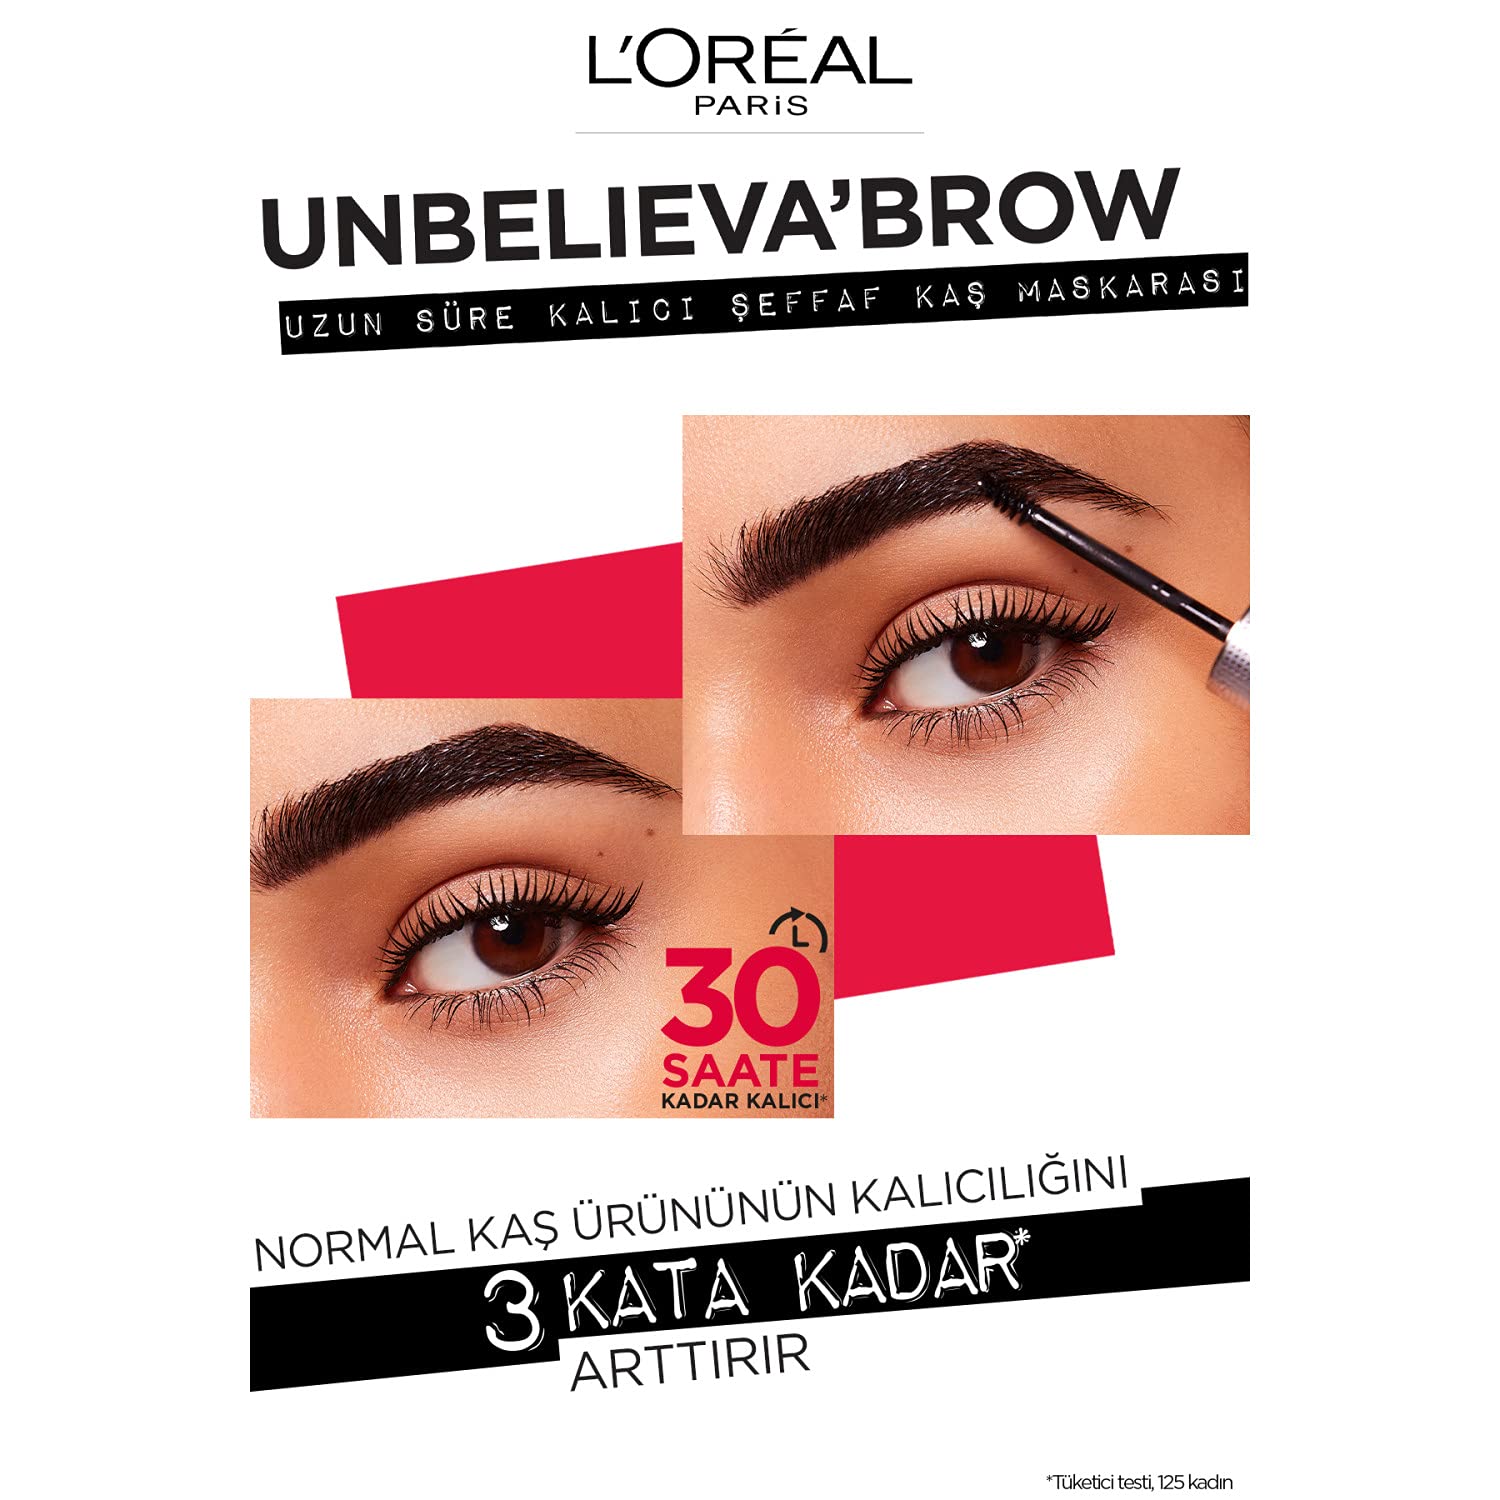 L'Oreal Paris Unbelieva-Brow Longwear Eyebrow Topcoat, Waterproof, Smudge-resistant, Transfer- Proof, Quick Drying, Easy and quick application with precise brush, Universal Transparent, 0.15 fl. oz.